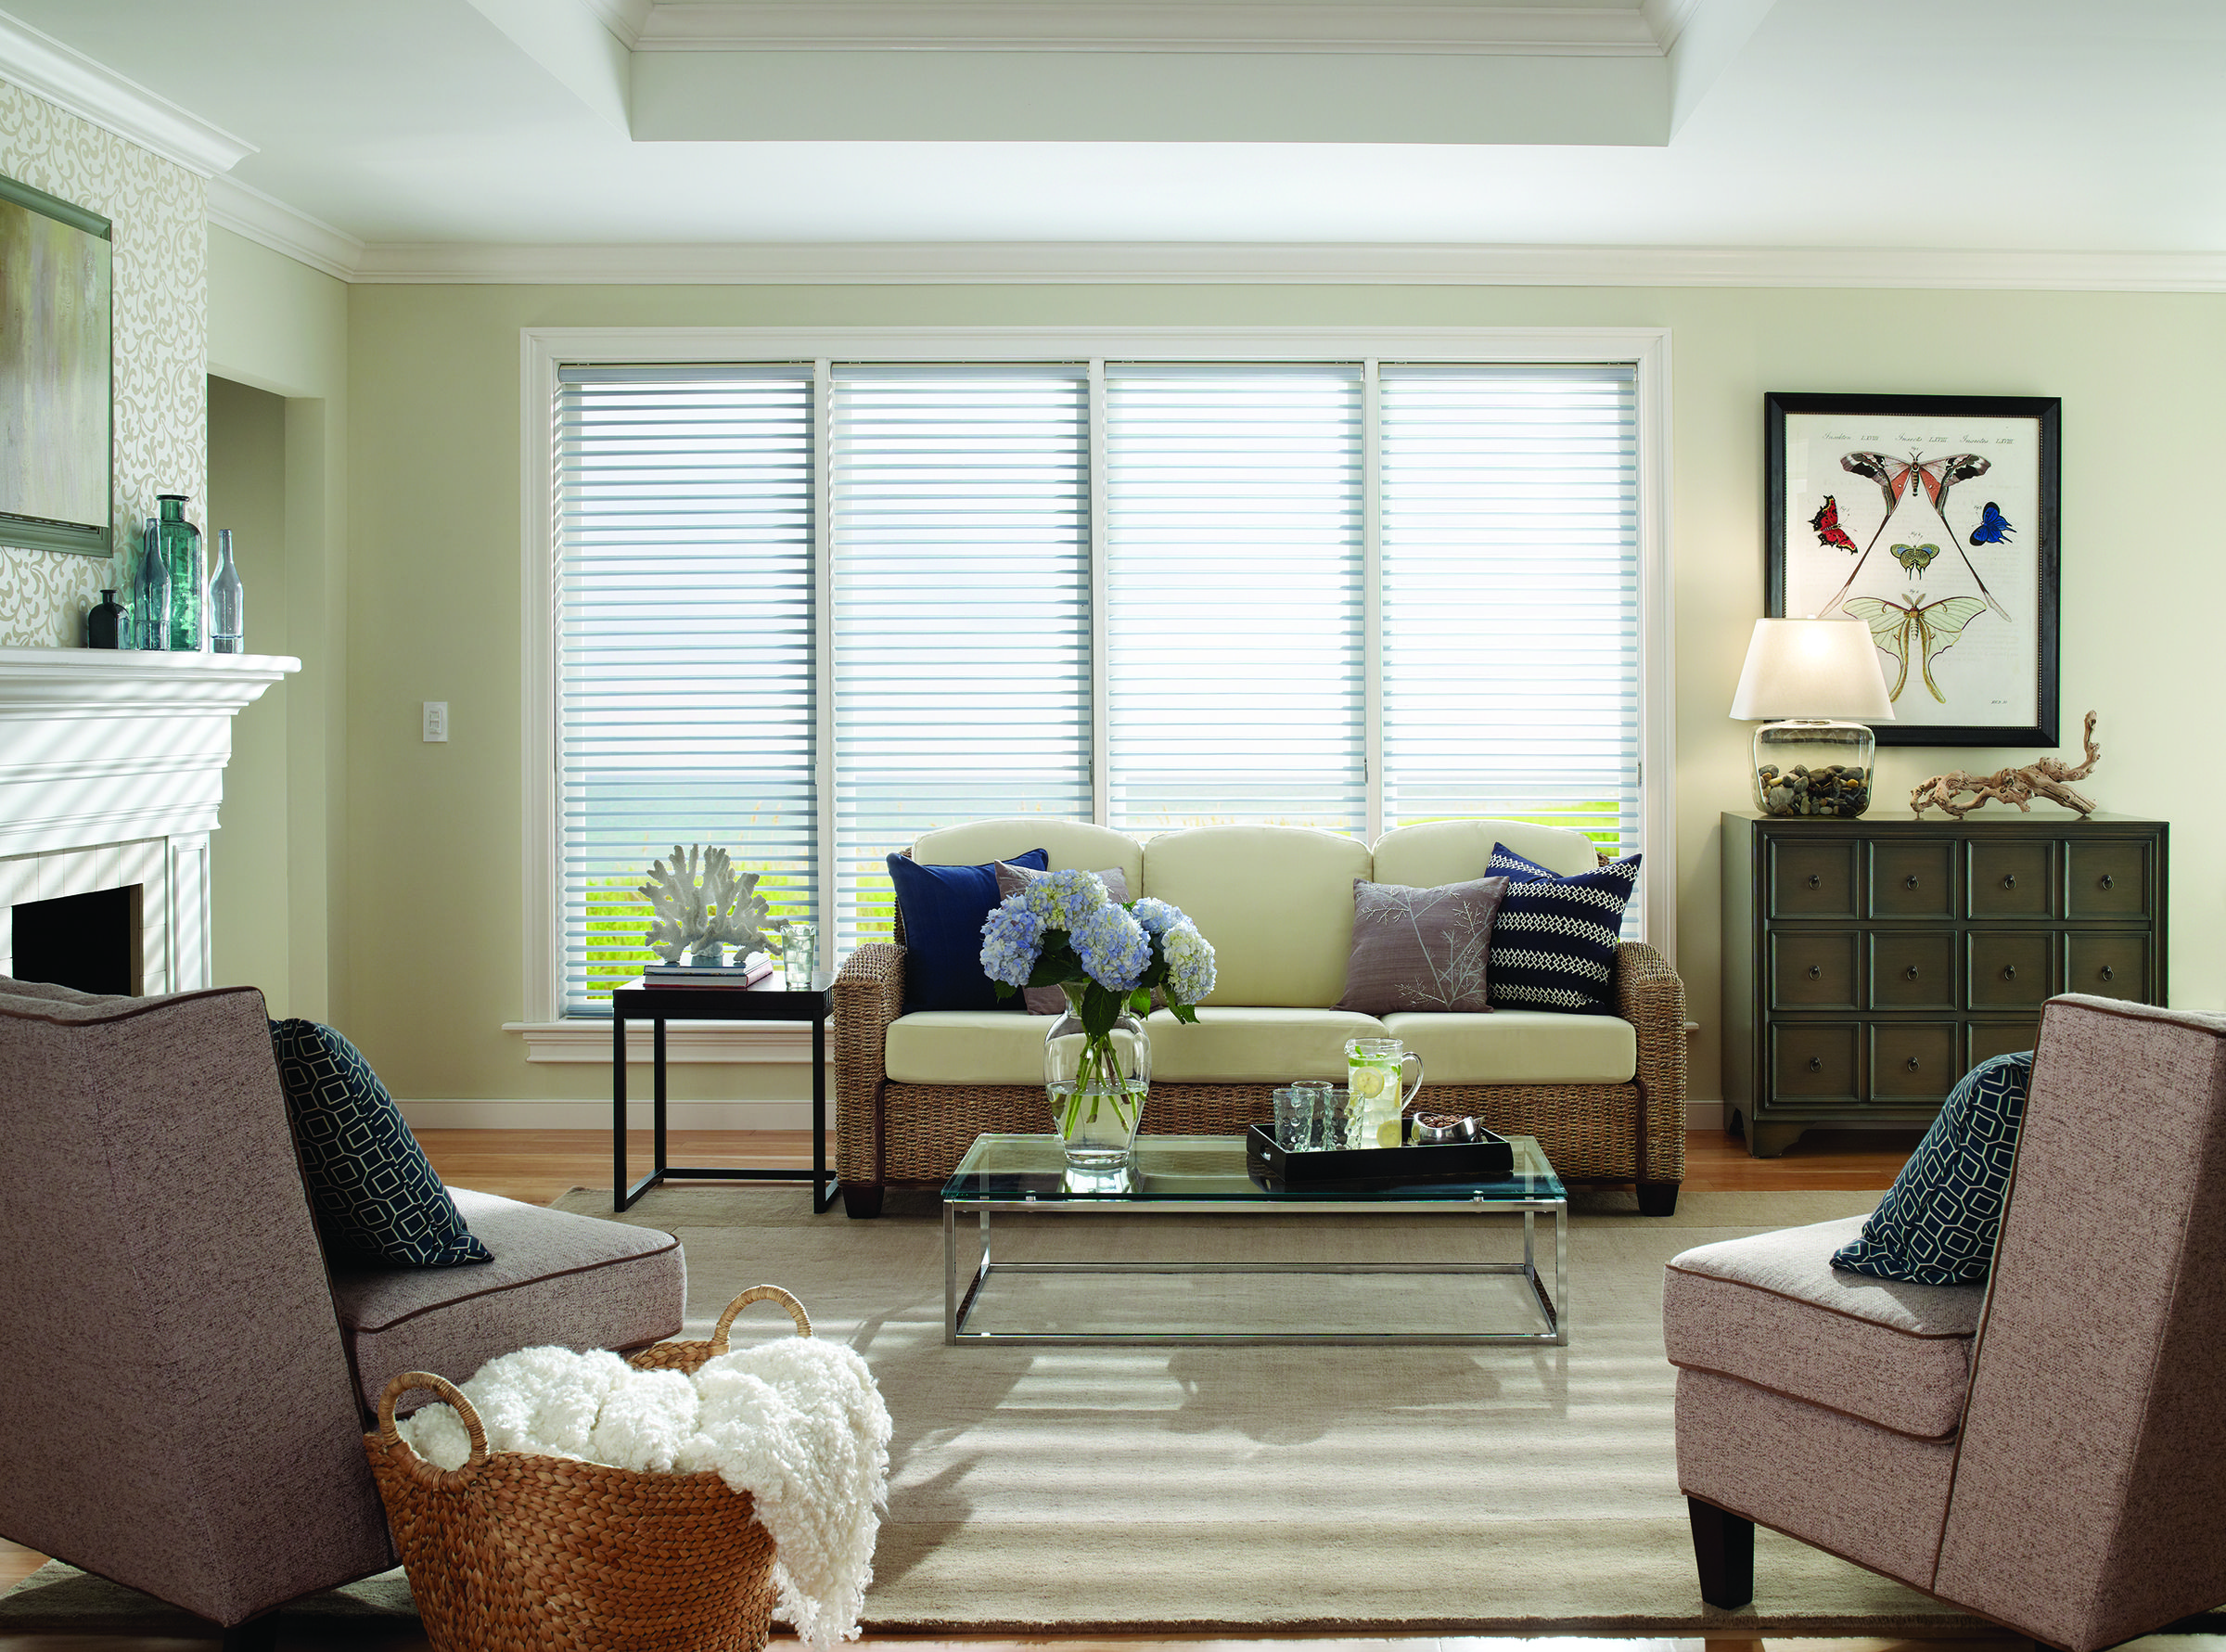 How To Buy Blinds And Shades Window Blinds And Shades Shopping Tips